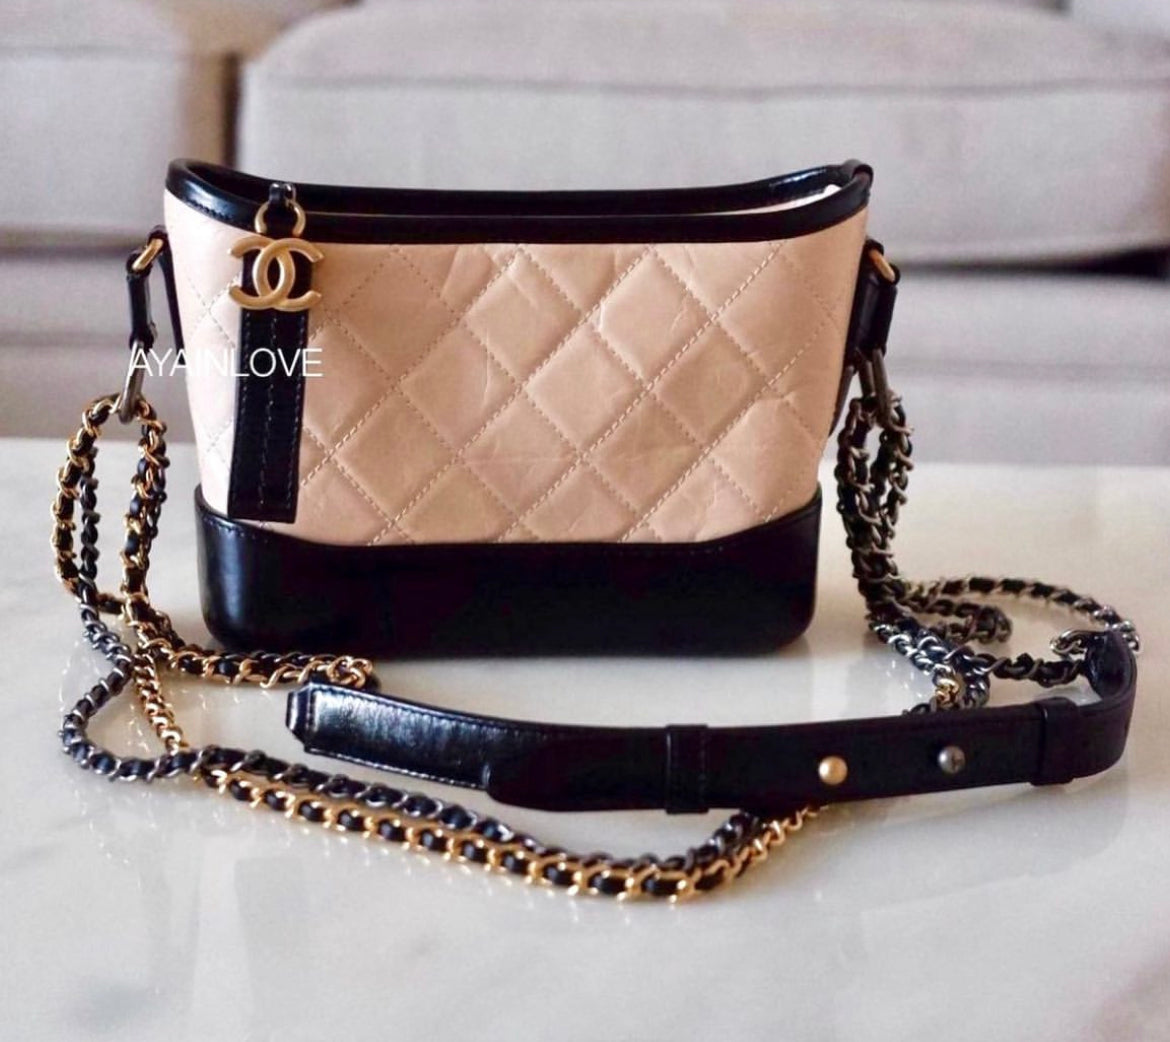 Chanel Beige/Black Quilted Leather Small Gabrielle Hobo Bag